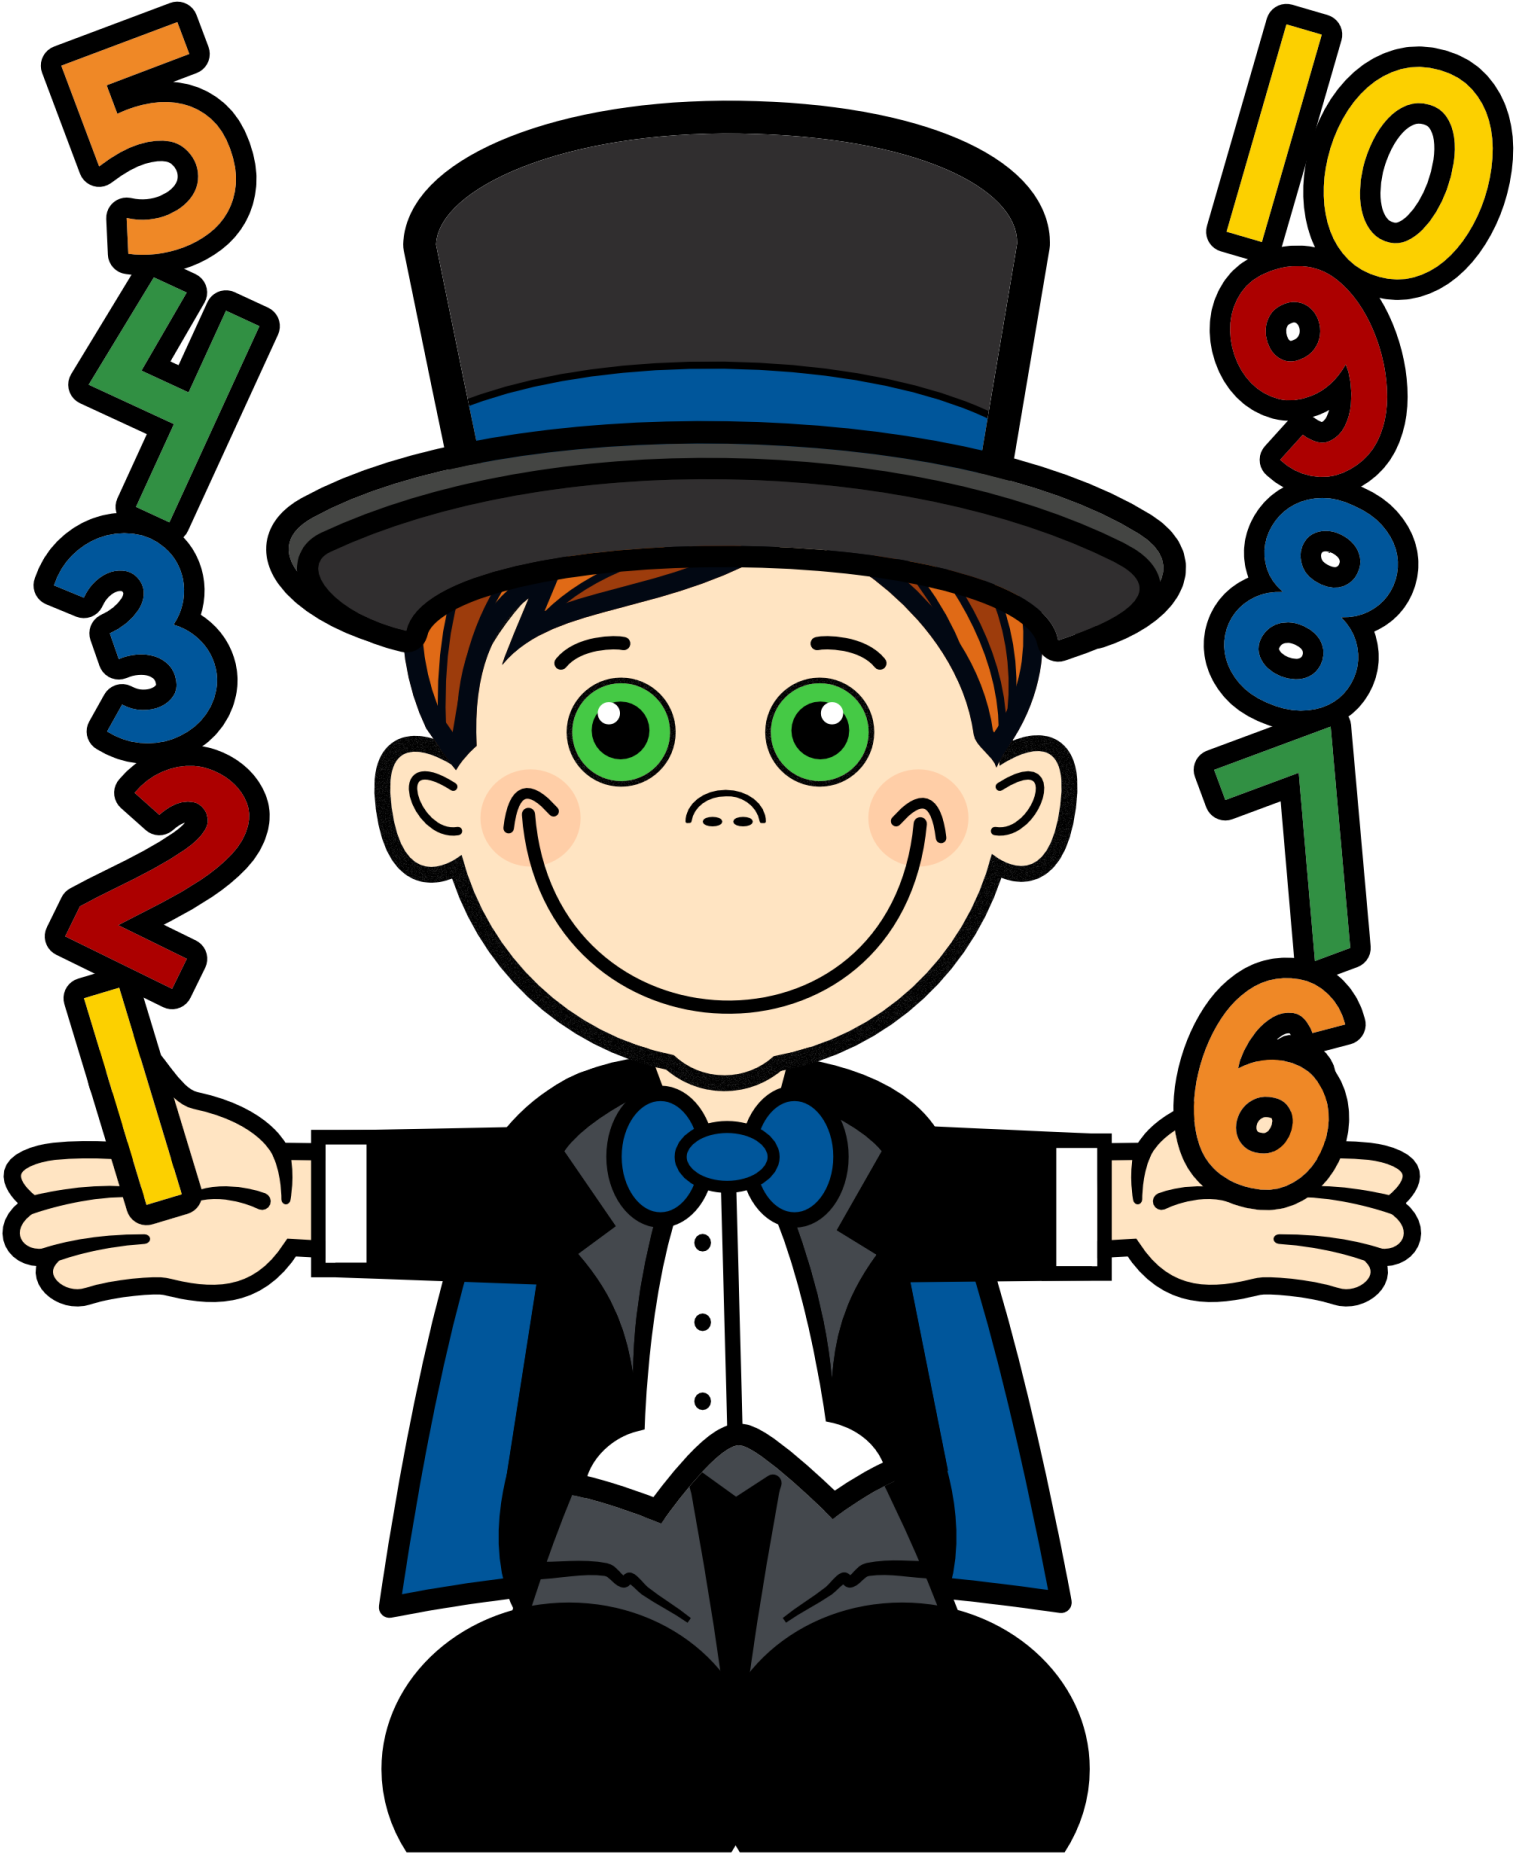 A Cartoon Of A Boy Juggling Numbers